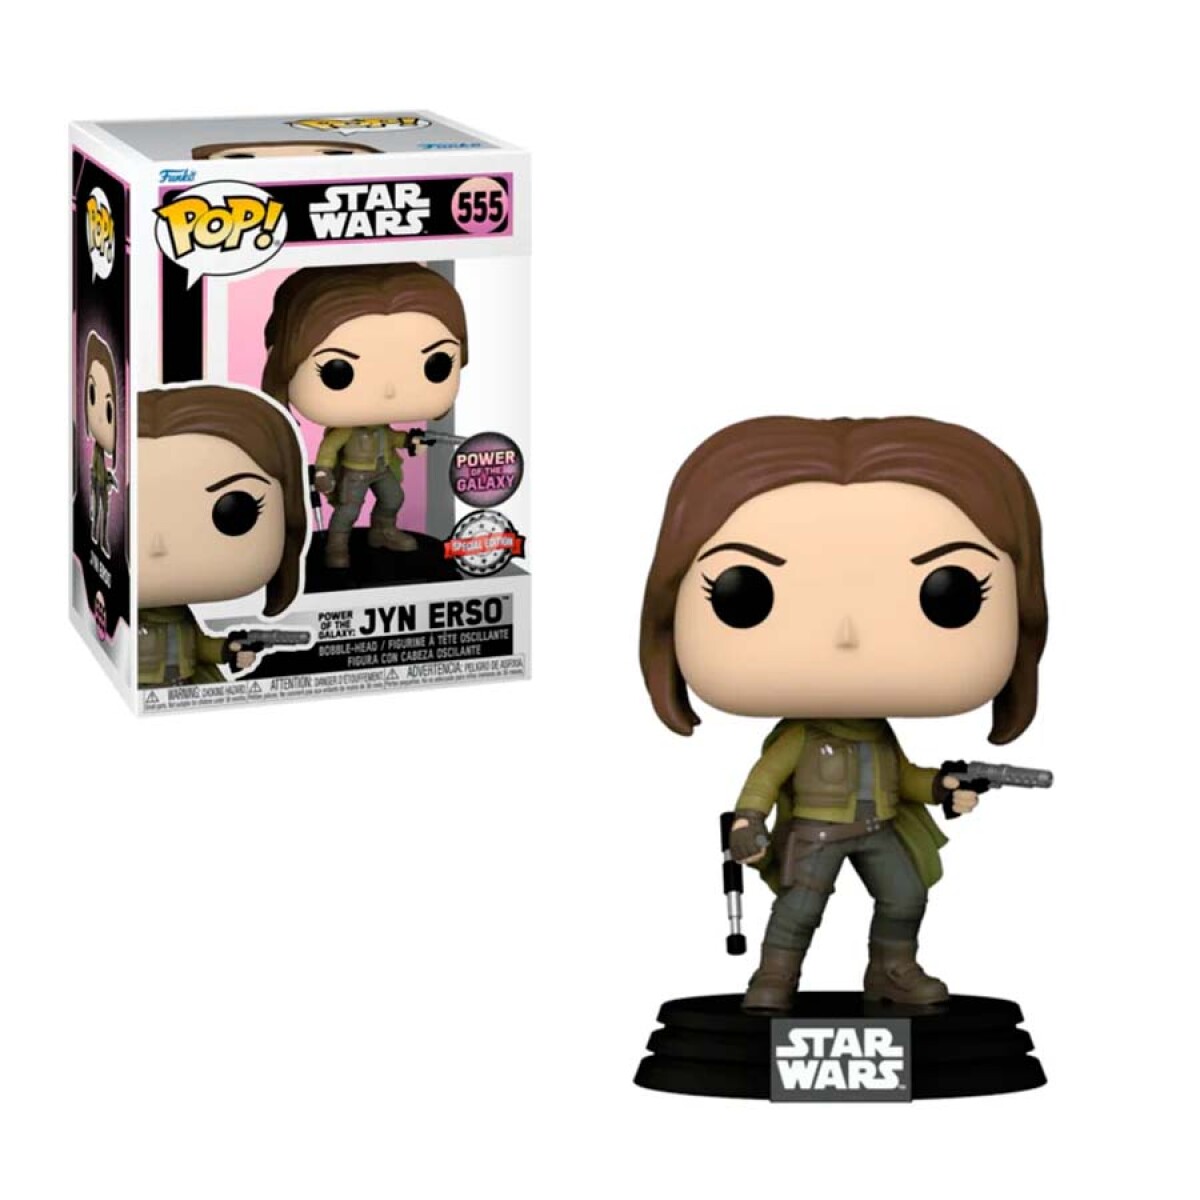 Jyn Erso • Star Wars Power Of The Galaxy [Exclusivo] - 538 